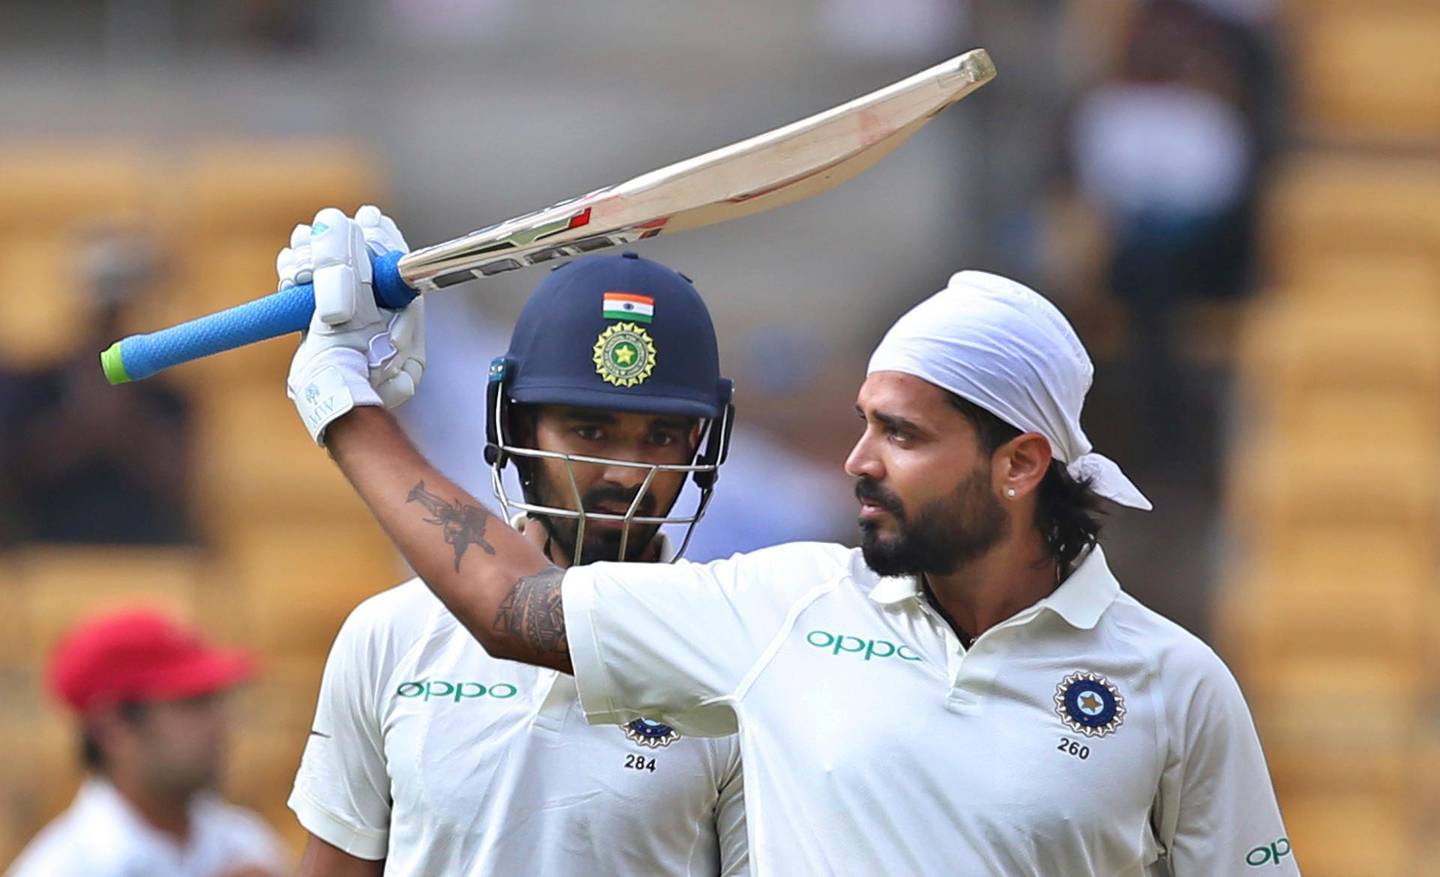 India's Lokesh Rahul, left, watches teammate Murali Vijay raise his bat to celebrate scoring a century during the one-off cricket test match against Afghanistan in Bangalore, India, Thursday, June 14, 2018. (AP Photo/Aijaz Rahi)